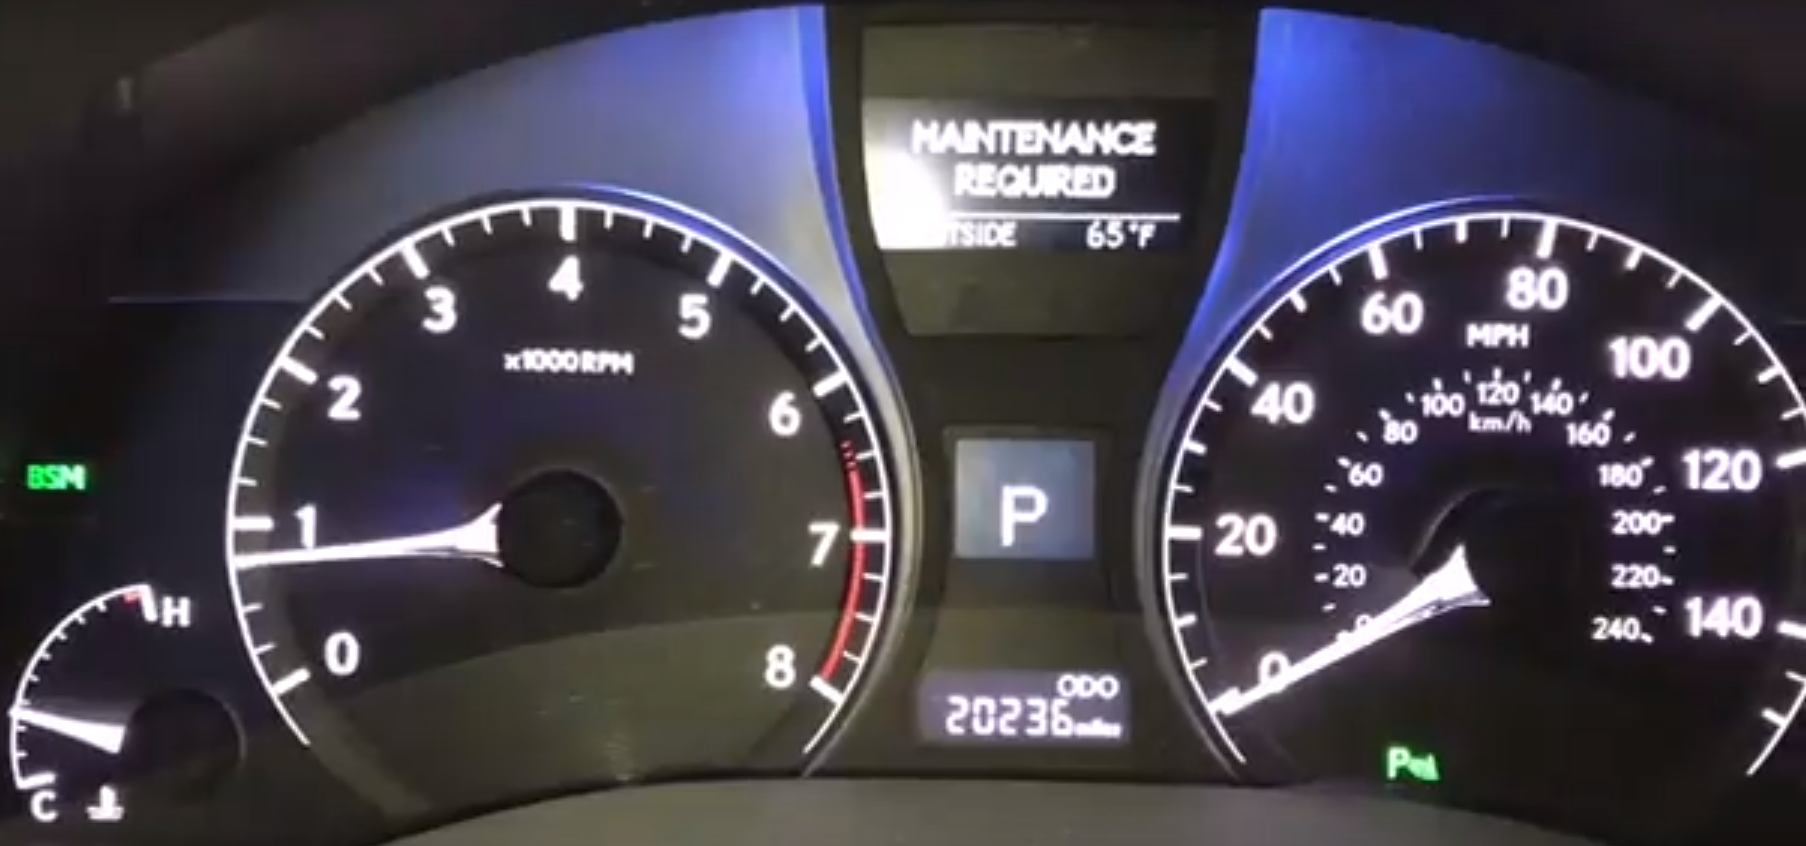 How To Turn Off The Maintenance Required Light How to Reset the Maintenance Required Light on a 2015 Lexus RX350 — How to  Automotive